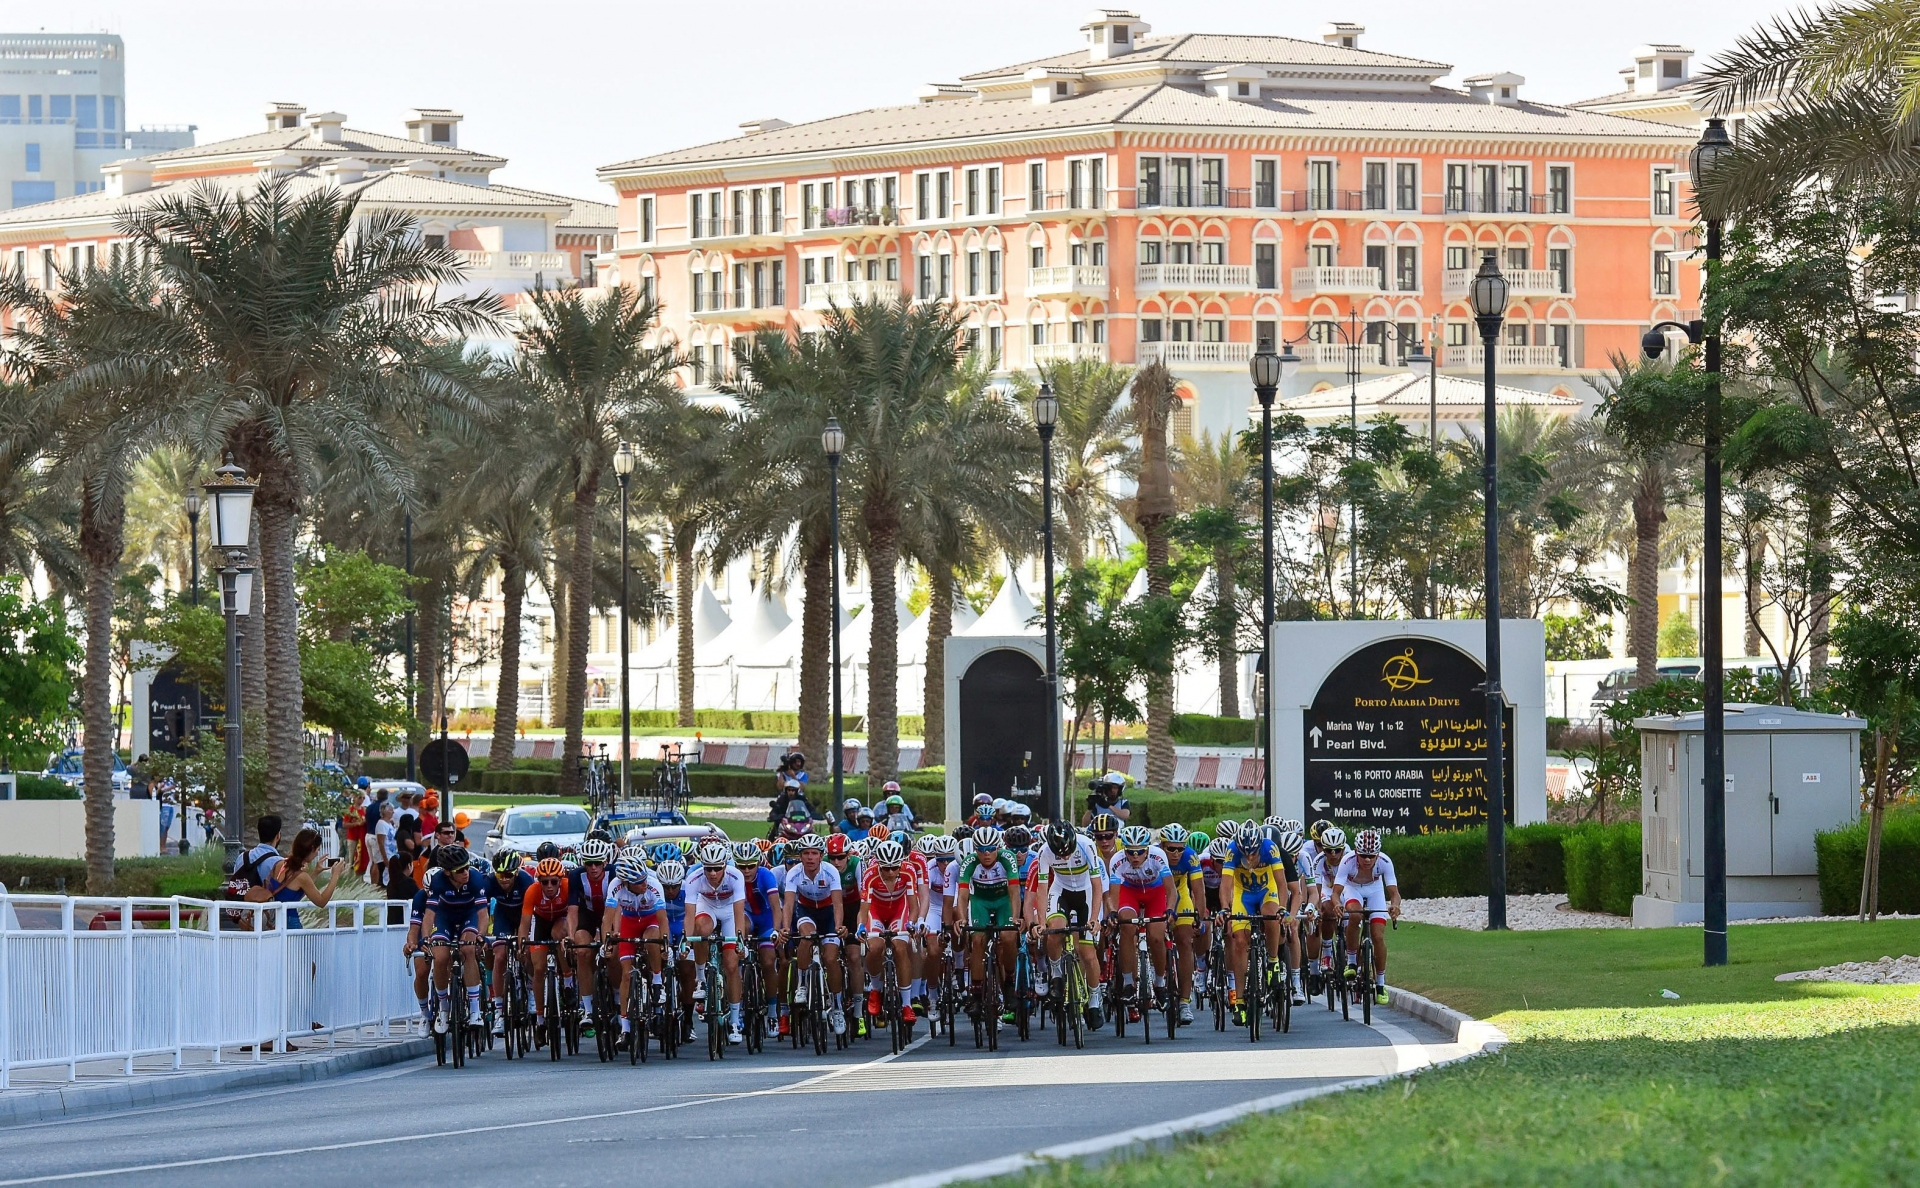 epa05585033 The peloton is on the way during the men's junior road race over 135.5km at the 2016 UCI Road Cycling World Championships in Qatar, Doha, 14 October 2016.  EPA/STRINGER QATAR ROAD CYCLING WORLD CHAMPIONSHIPS 2016